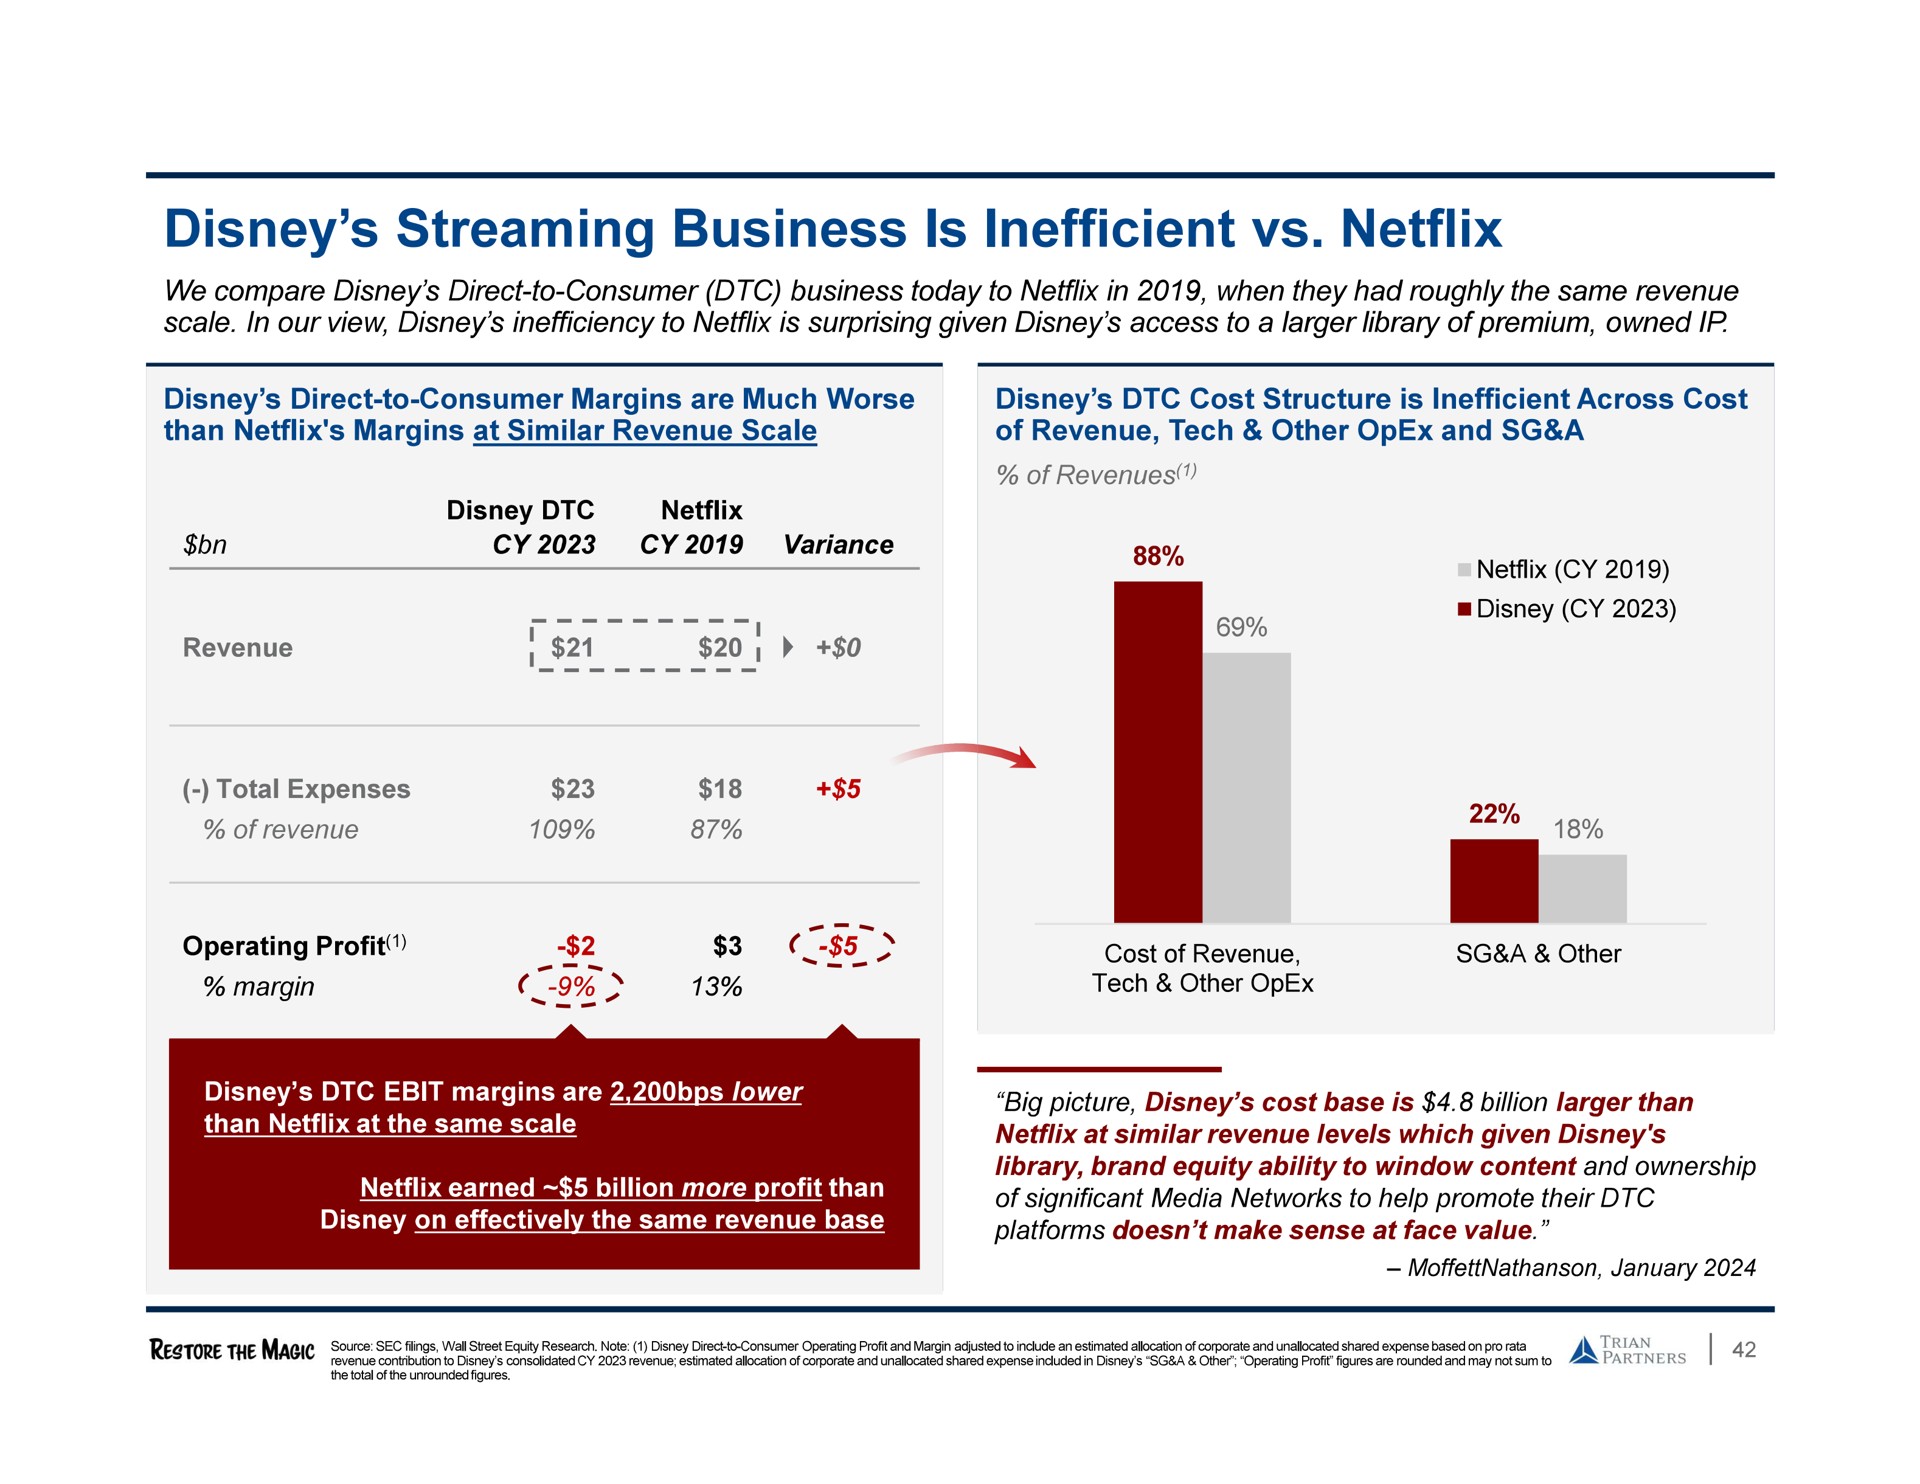 streaming business is inefficient | Trian Partners